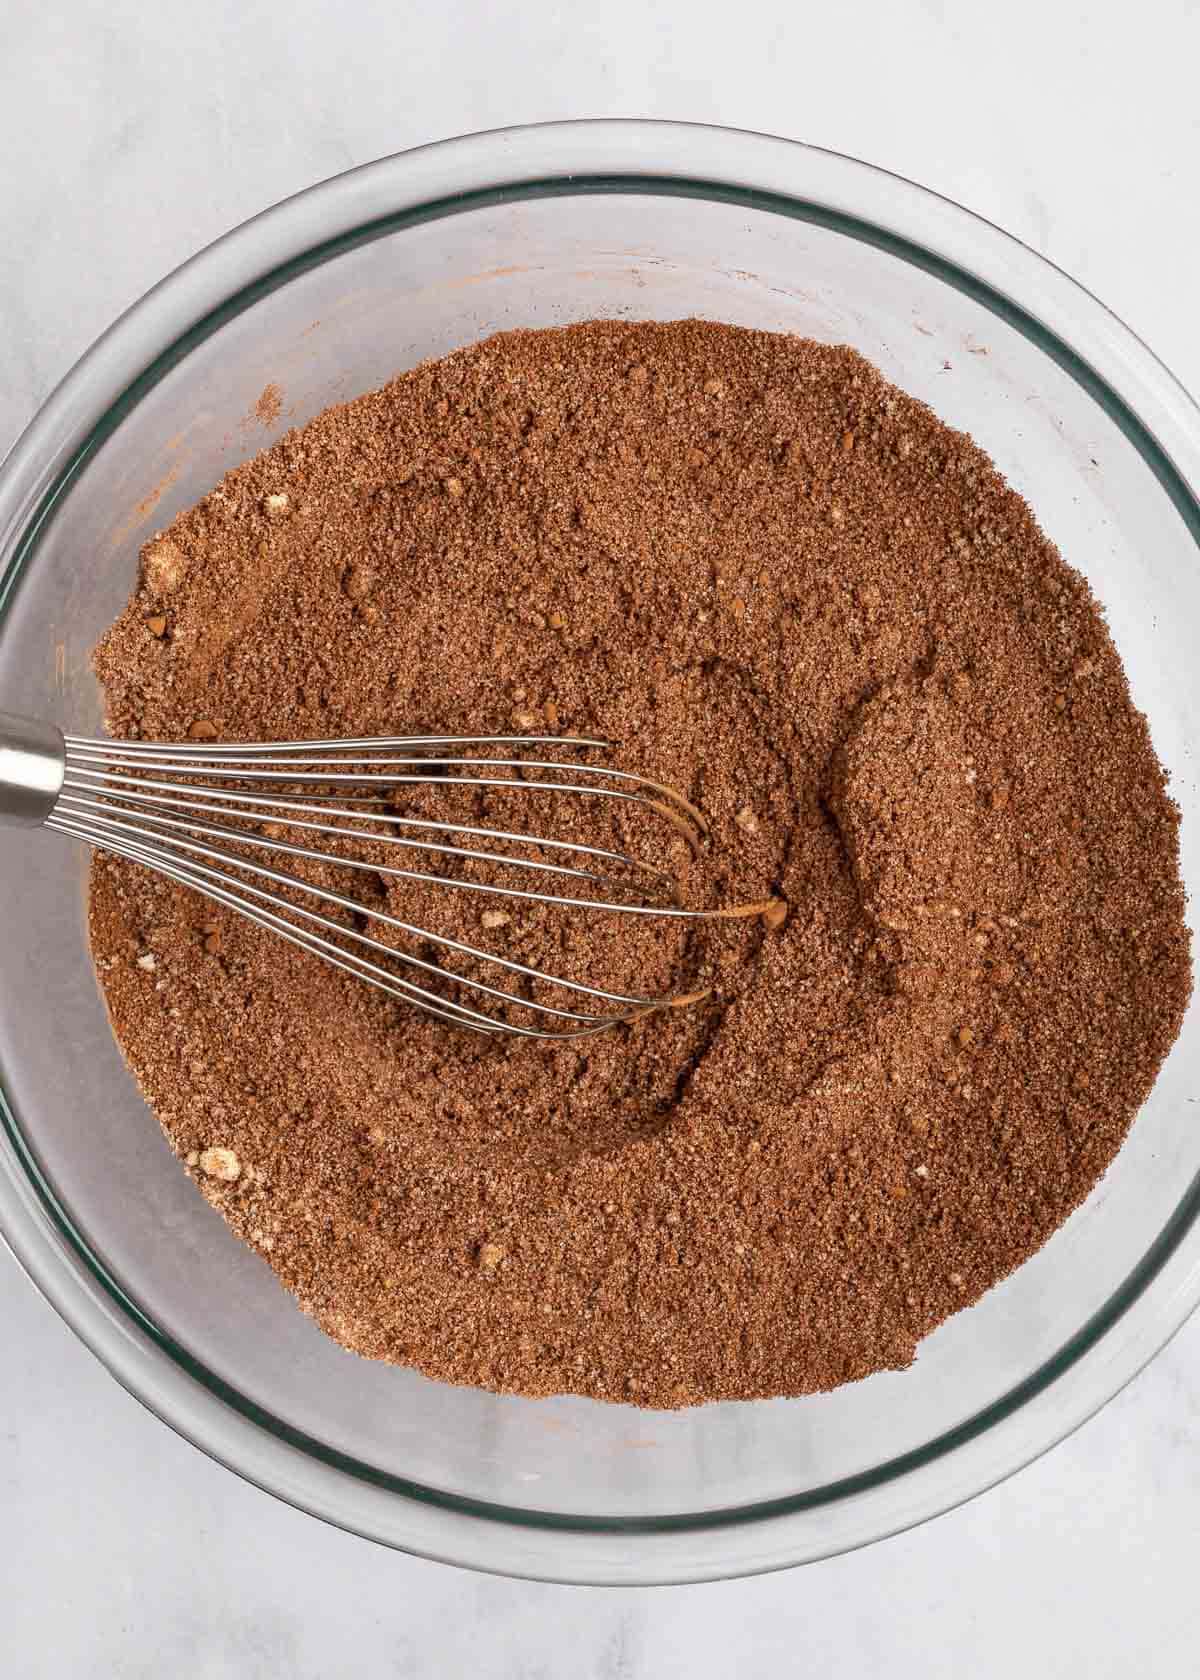 A mixing bowl with almond flour, cocoa powder, and other dry ingredients, and a whisk